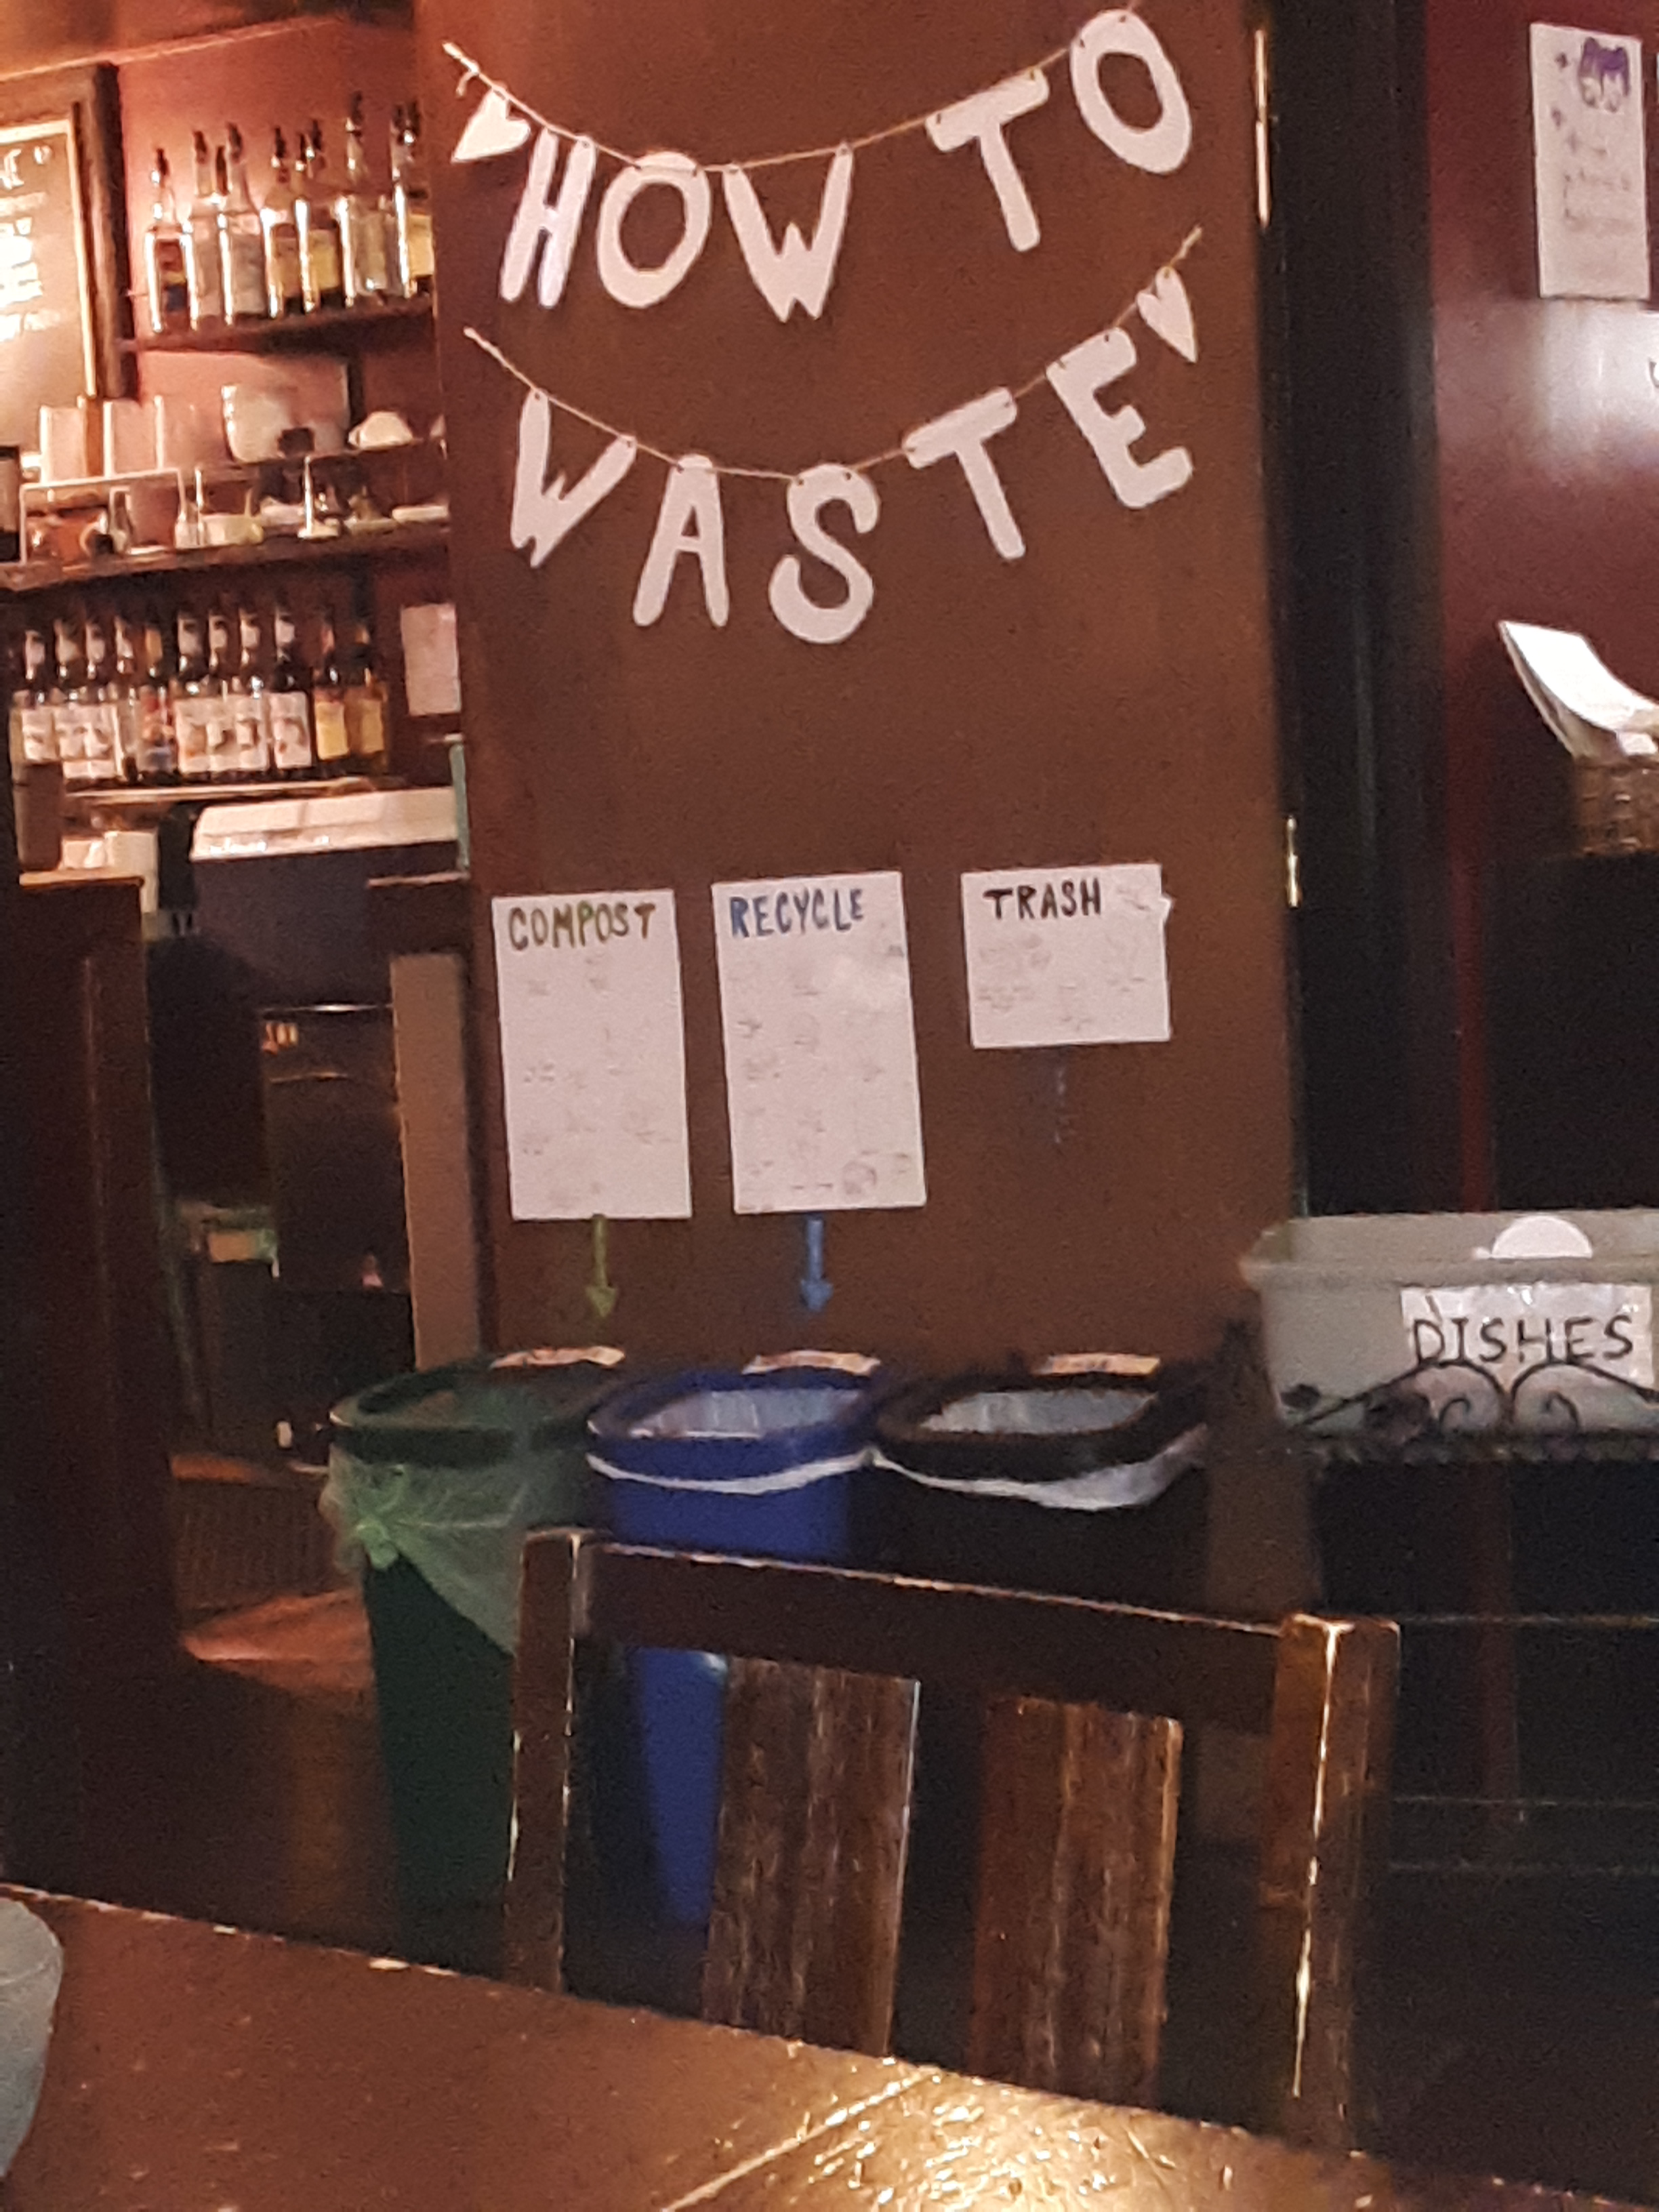 Living well in the 21st century. Limassol, Cyprus. Picture of the compost, recycle, and garbage in a restaurant in Seattle, WA. 